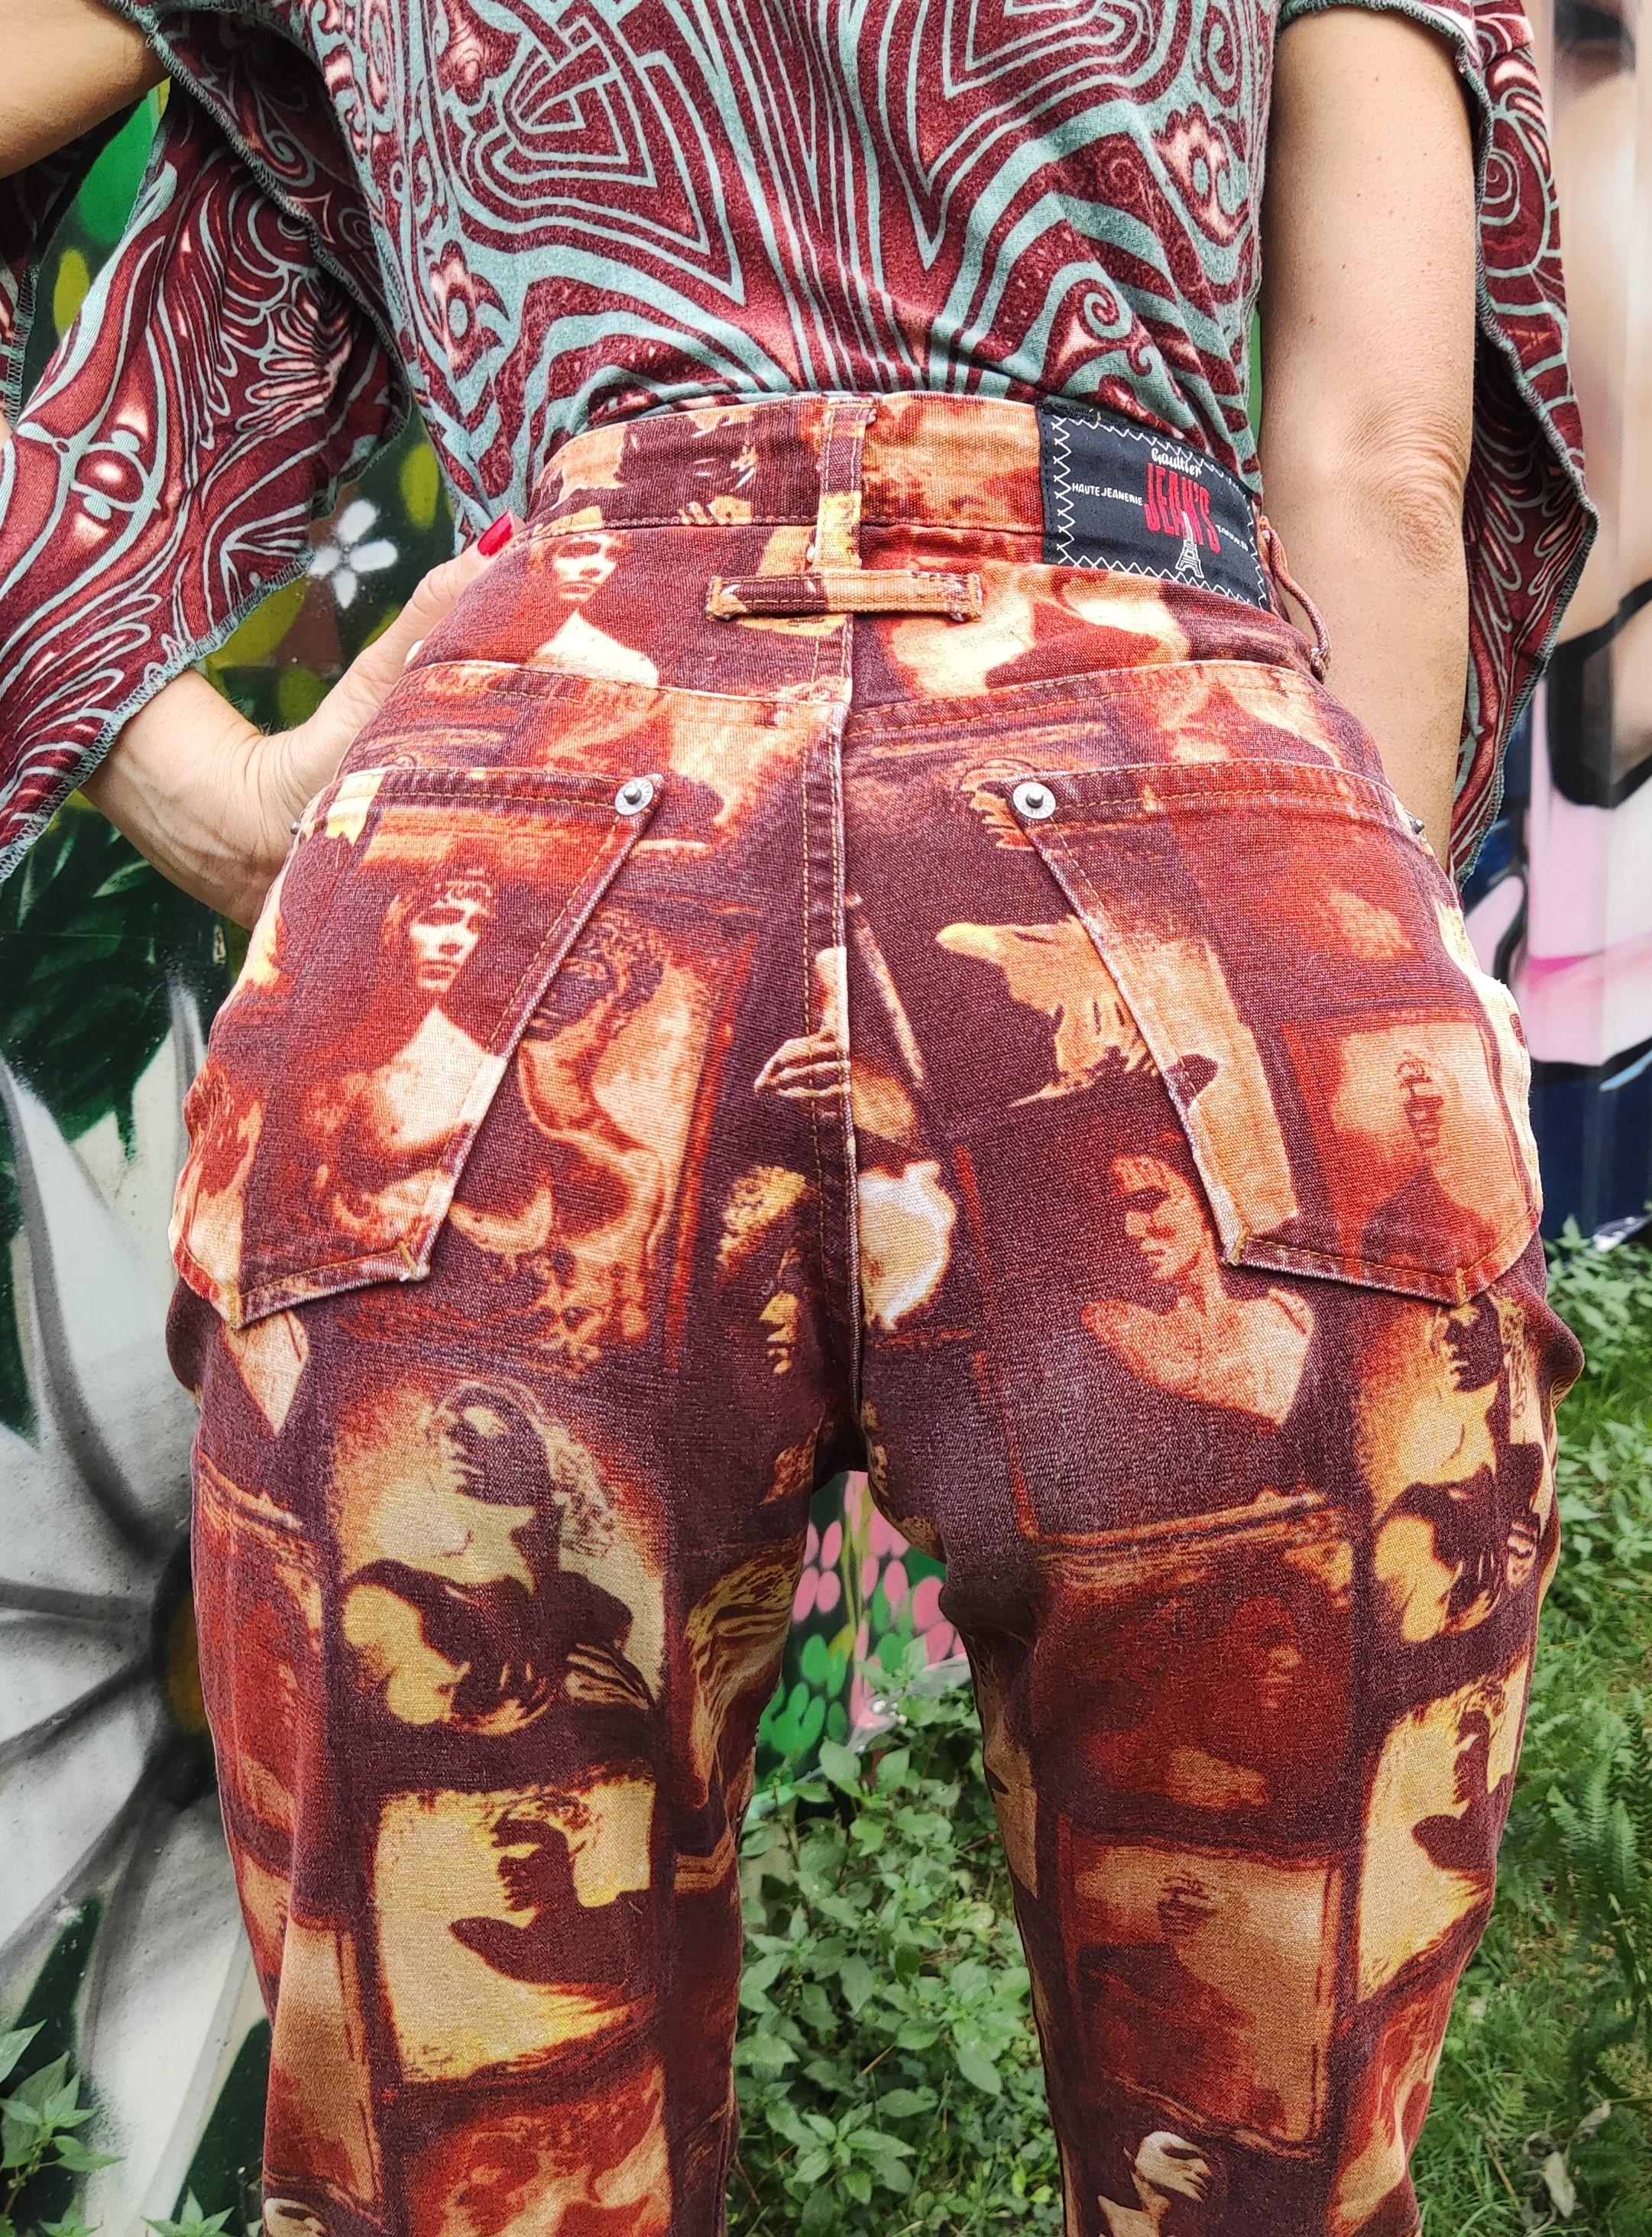 JEAN PAUL GAULTIER vintage pants featuring *Portraits of Beauty* print.
Adonis and Aphrodite!

Gaultier buttons
Gaultier Jean`s tab with Eiffel tower on the back

GOOD CONDITION! Moderatley faded (side, back), but still wonderful to wear! Please,